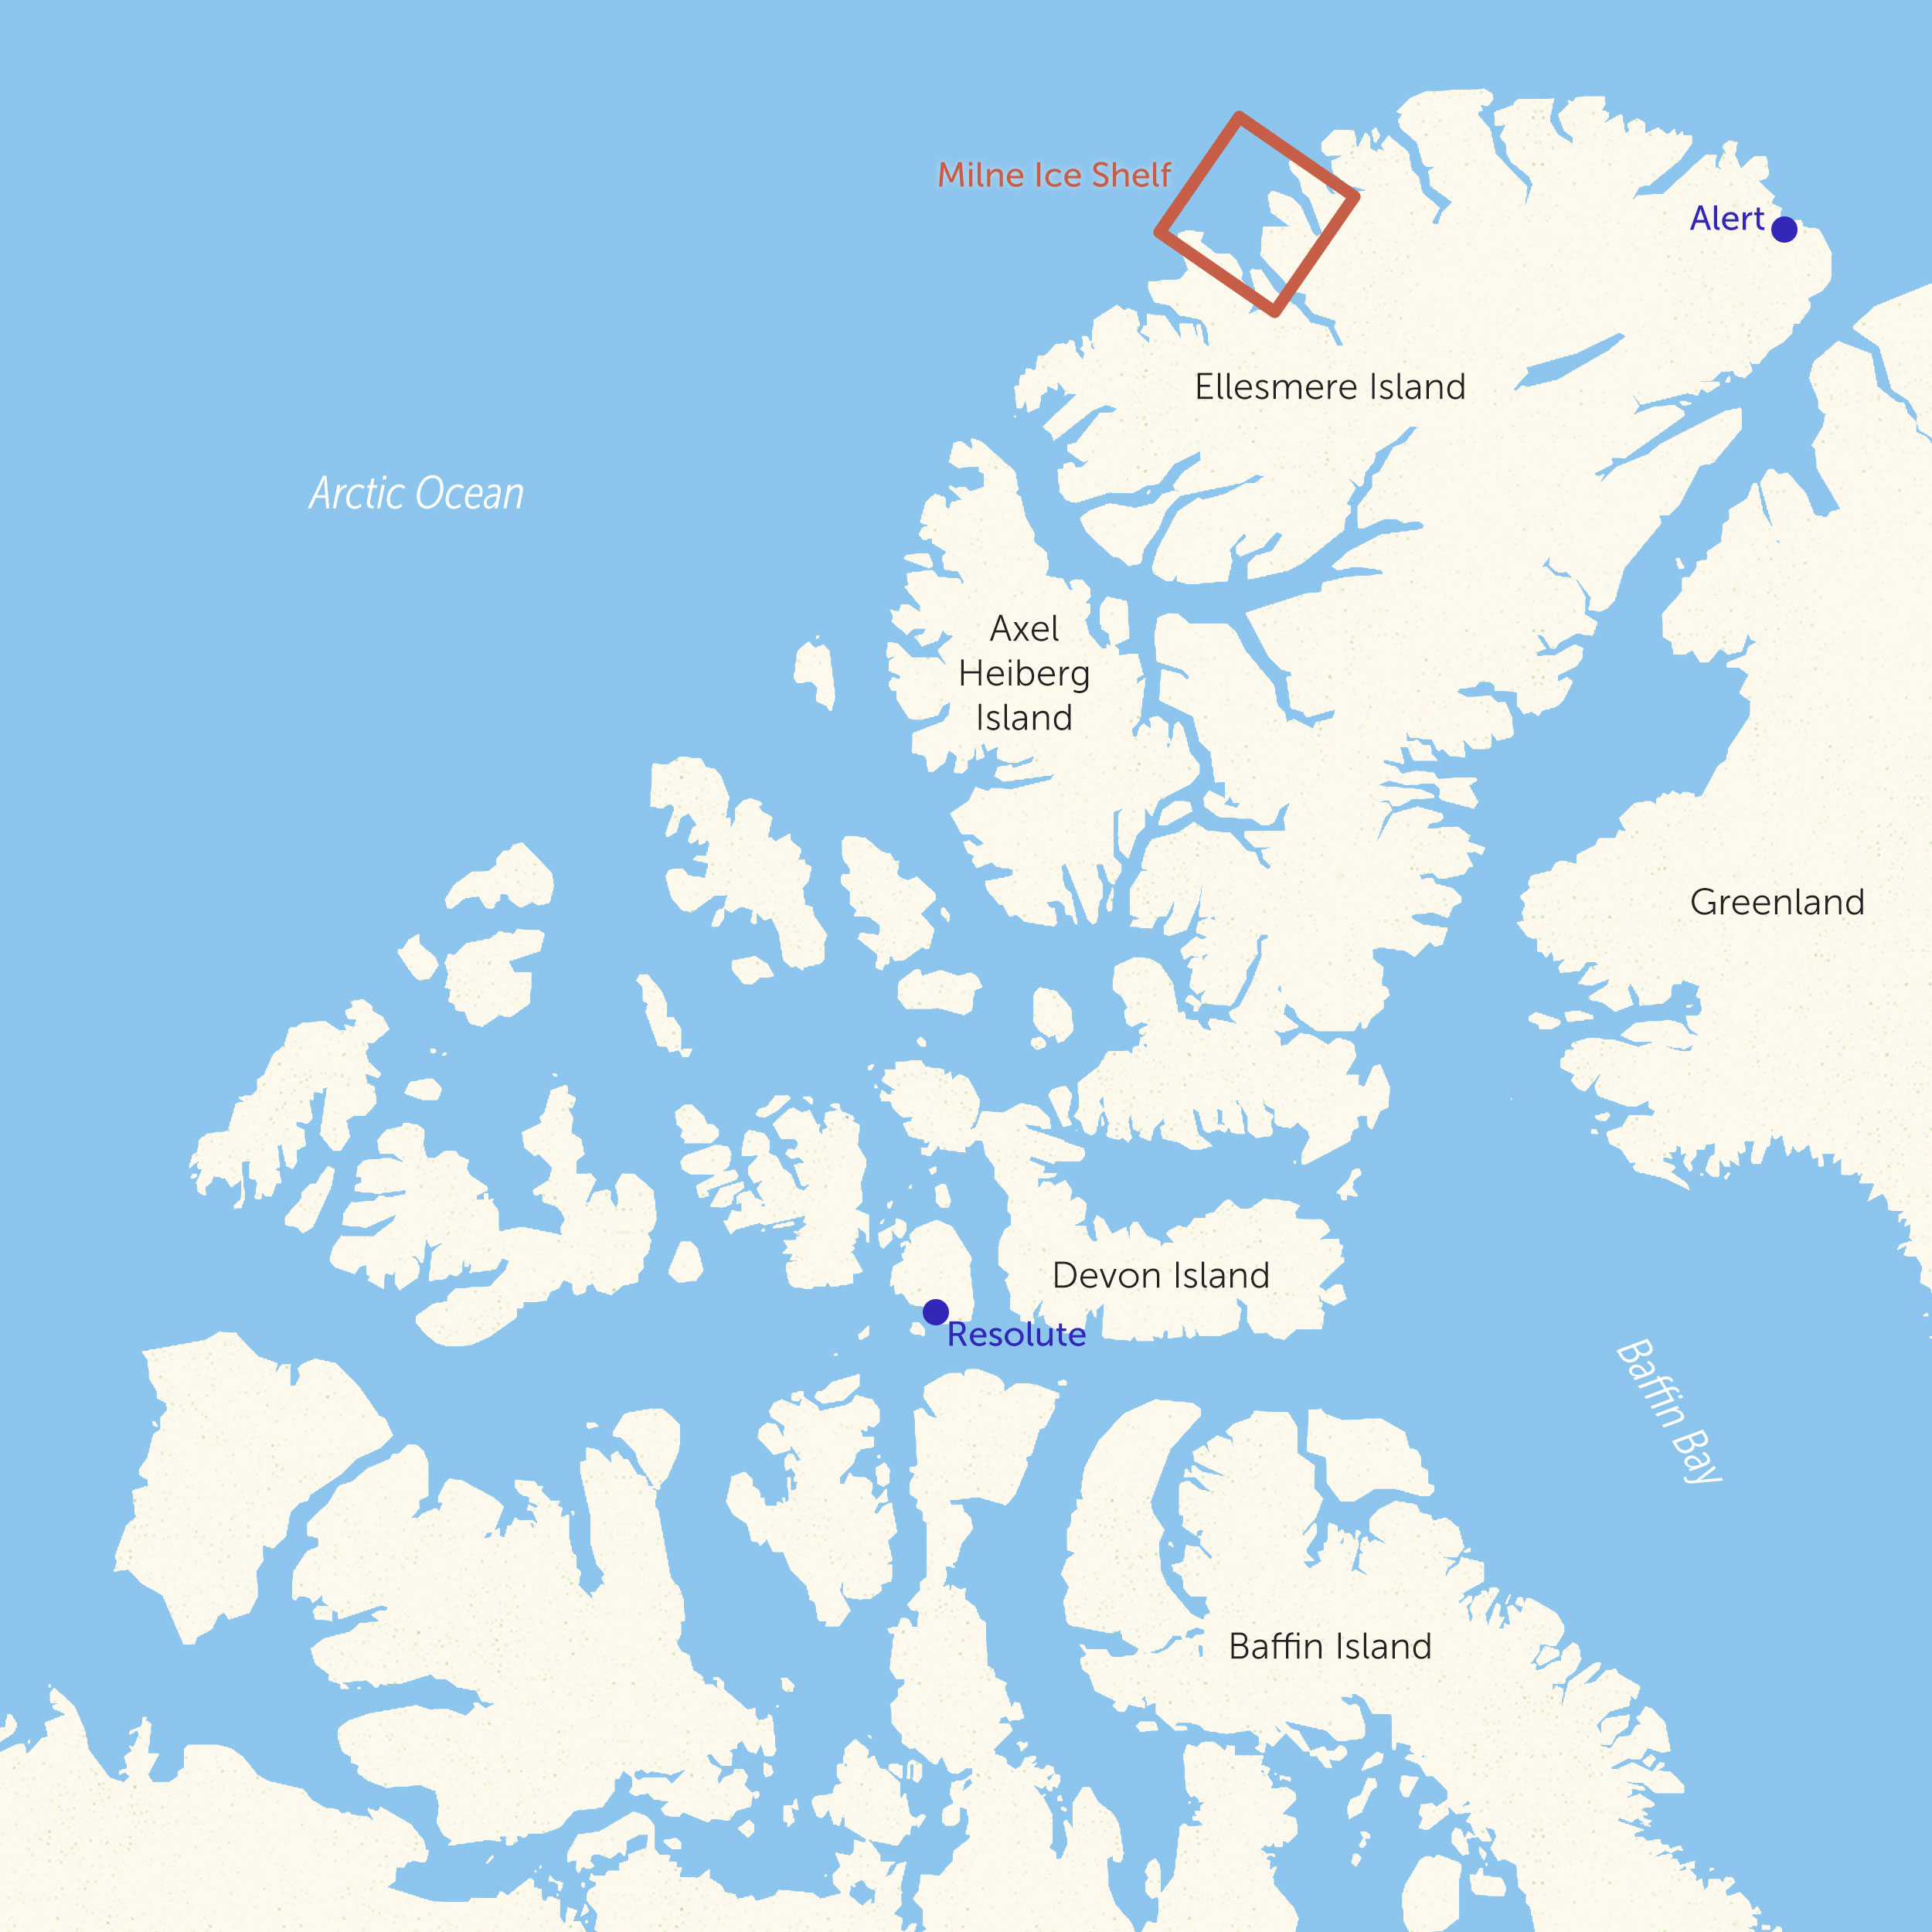 Map of Canadian Arctic showing location of Milne Ice Shelf 